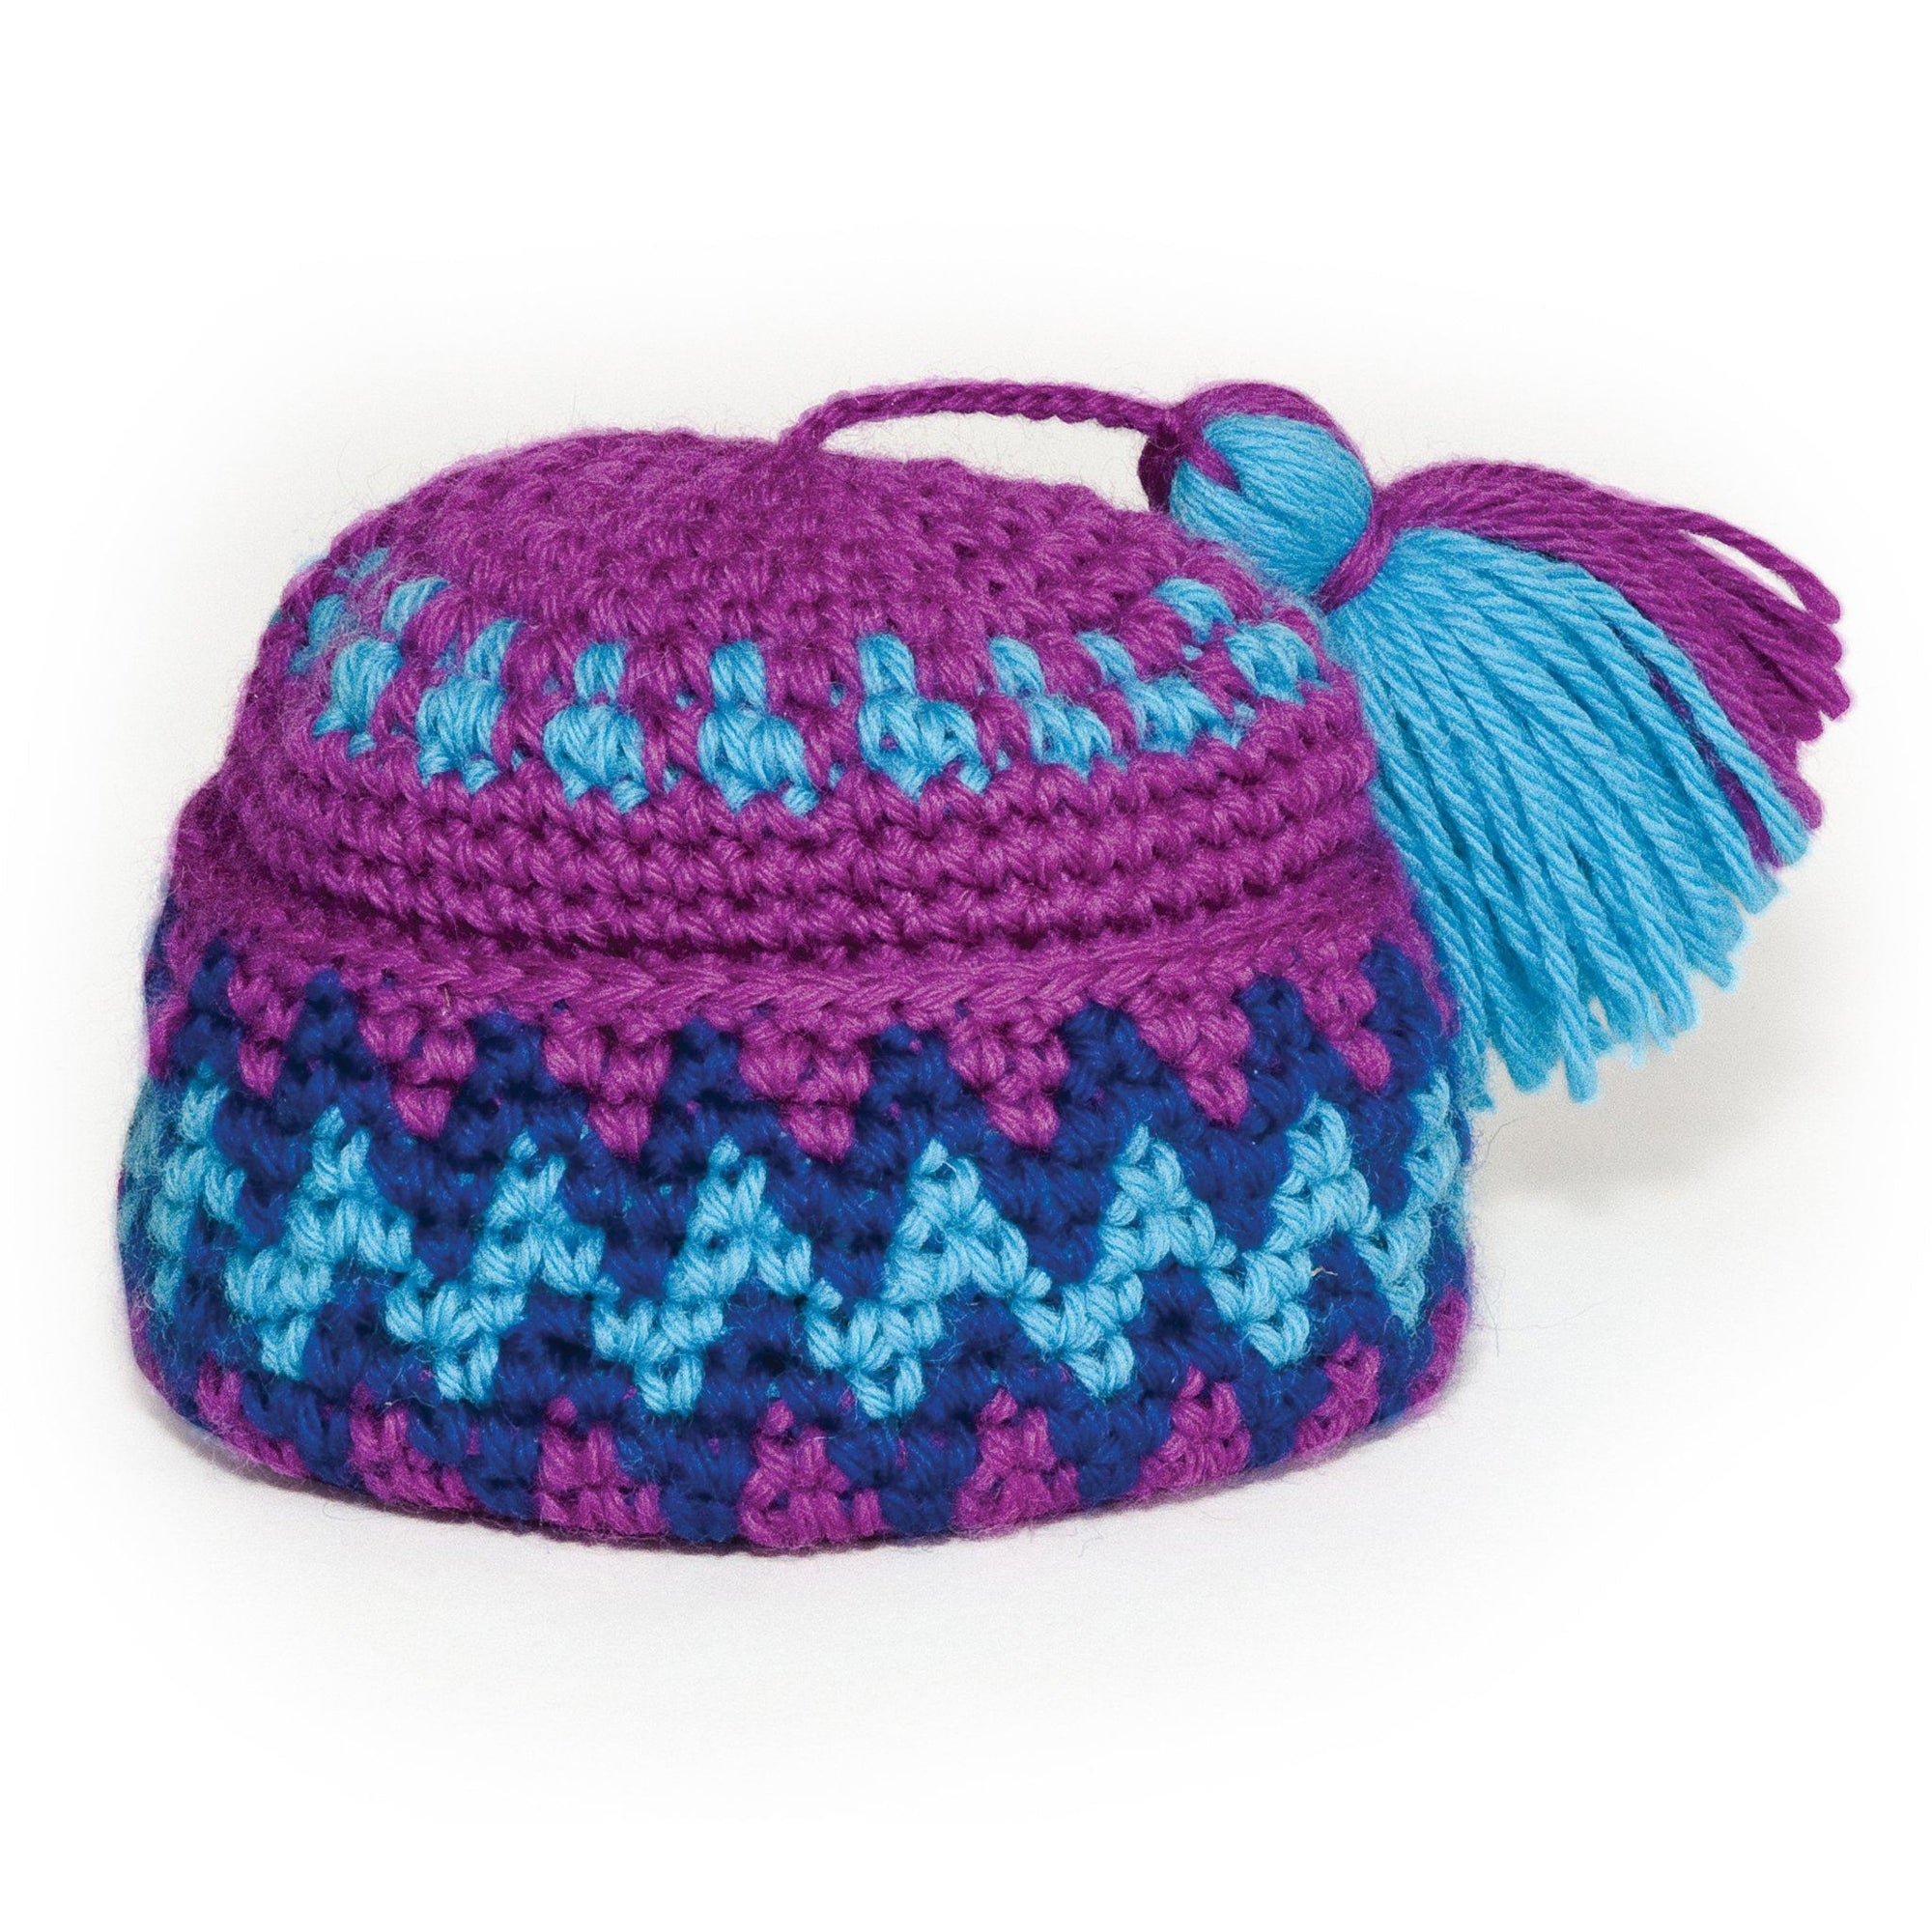 Purple and blue hand-knit pang hat fits all 18 inch dolls. 